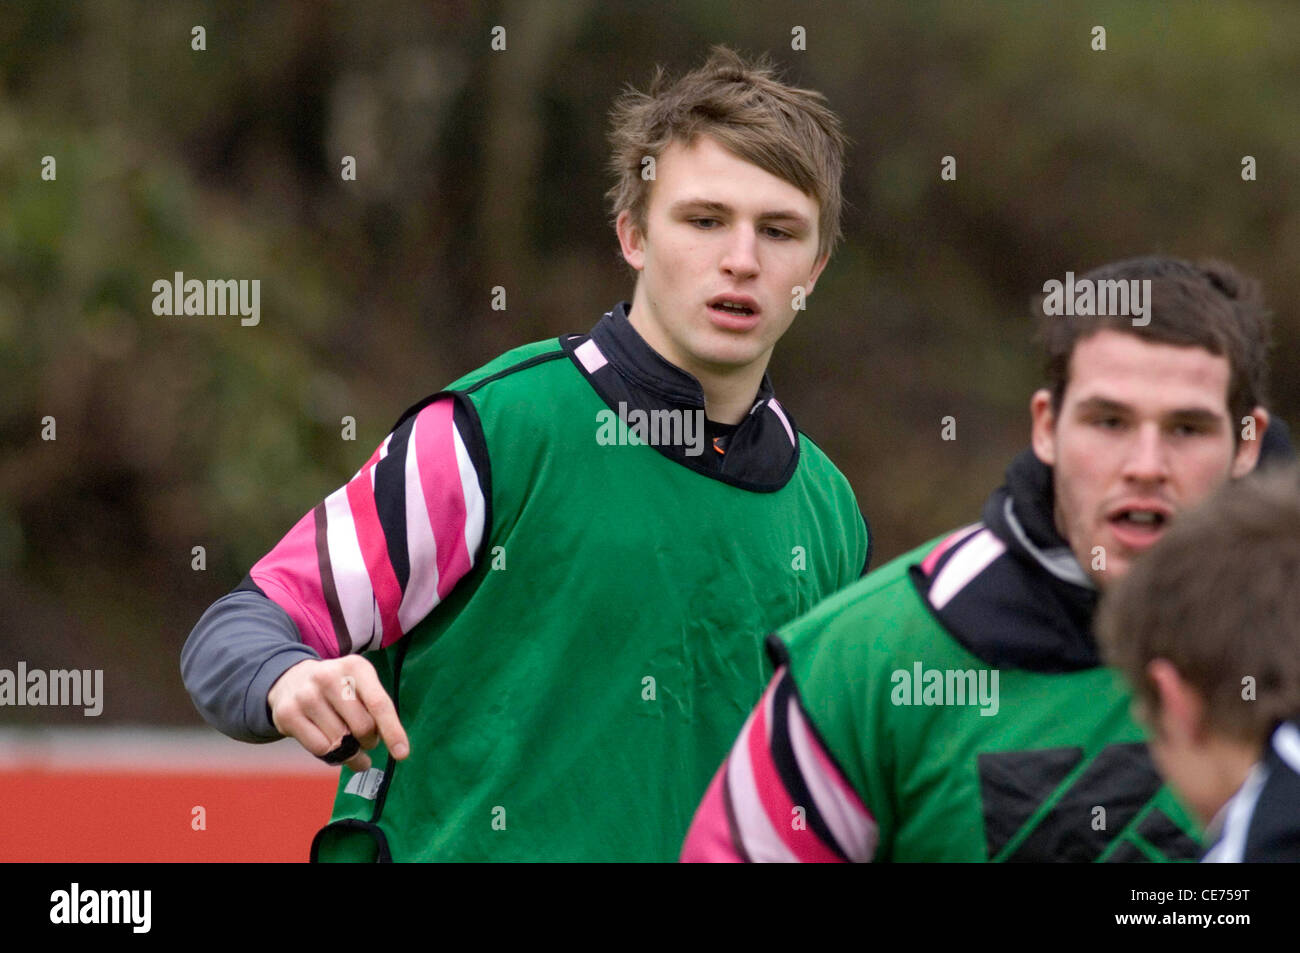 Ospreys 17-year-old rugby player Tom Prydie (left). Stock Photo